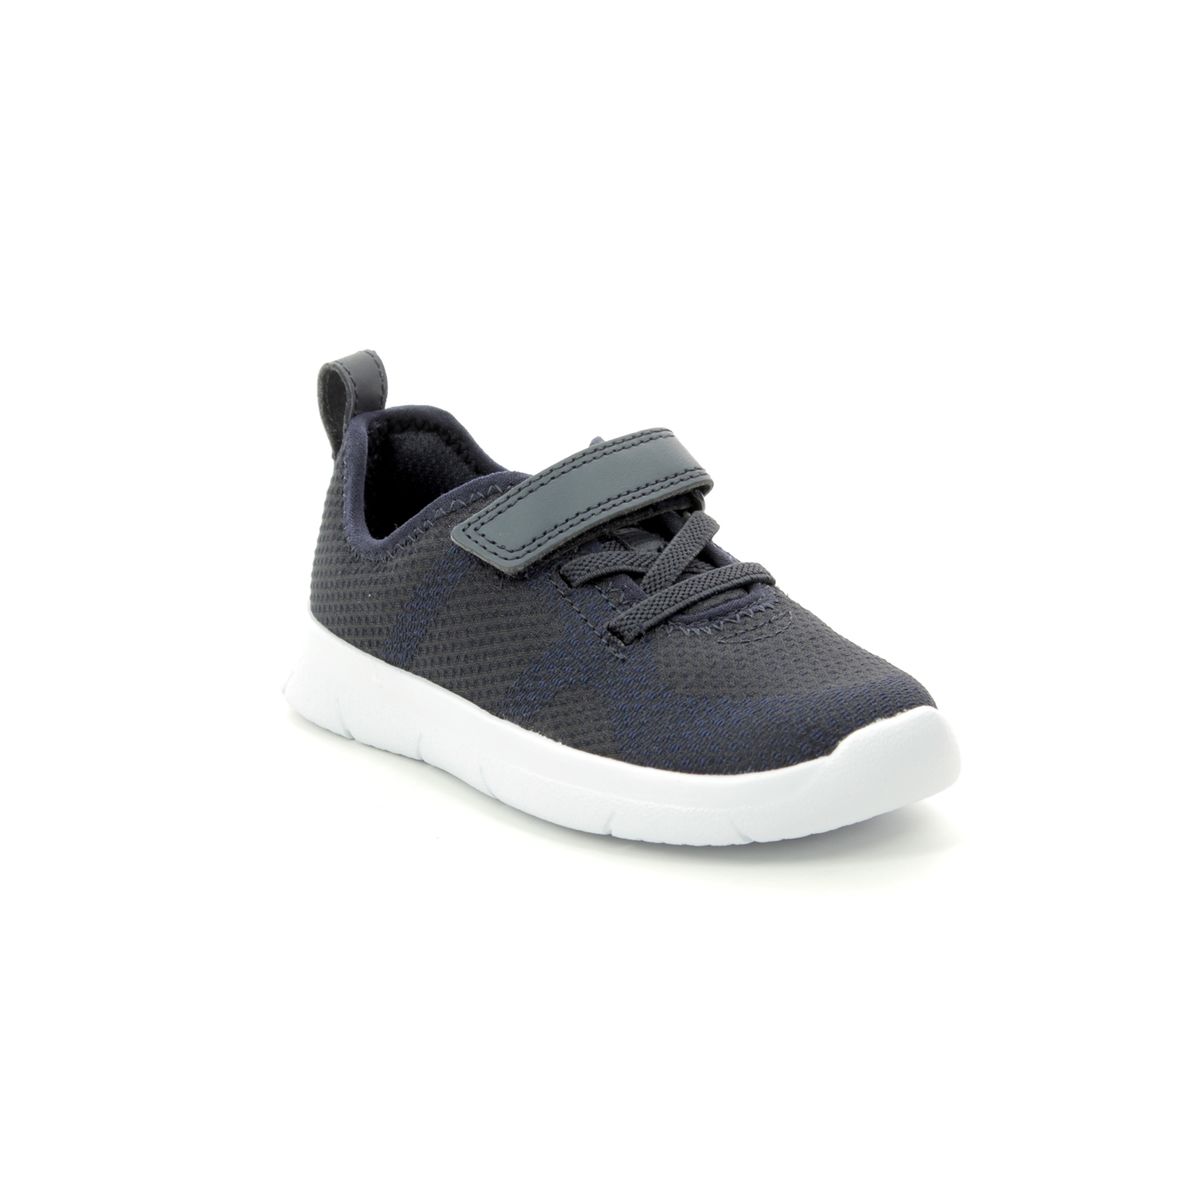 Clarks Ath Flux T Navy Kids Toddler Boys Trainers 412696F In Size 8 In Plain Navy F Width Fitting Regular Fit For kids